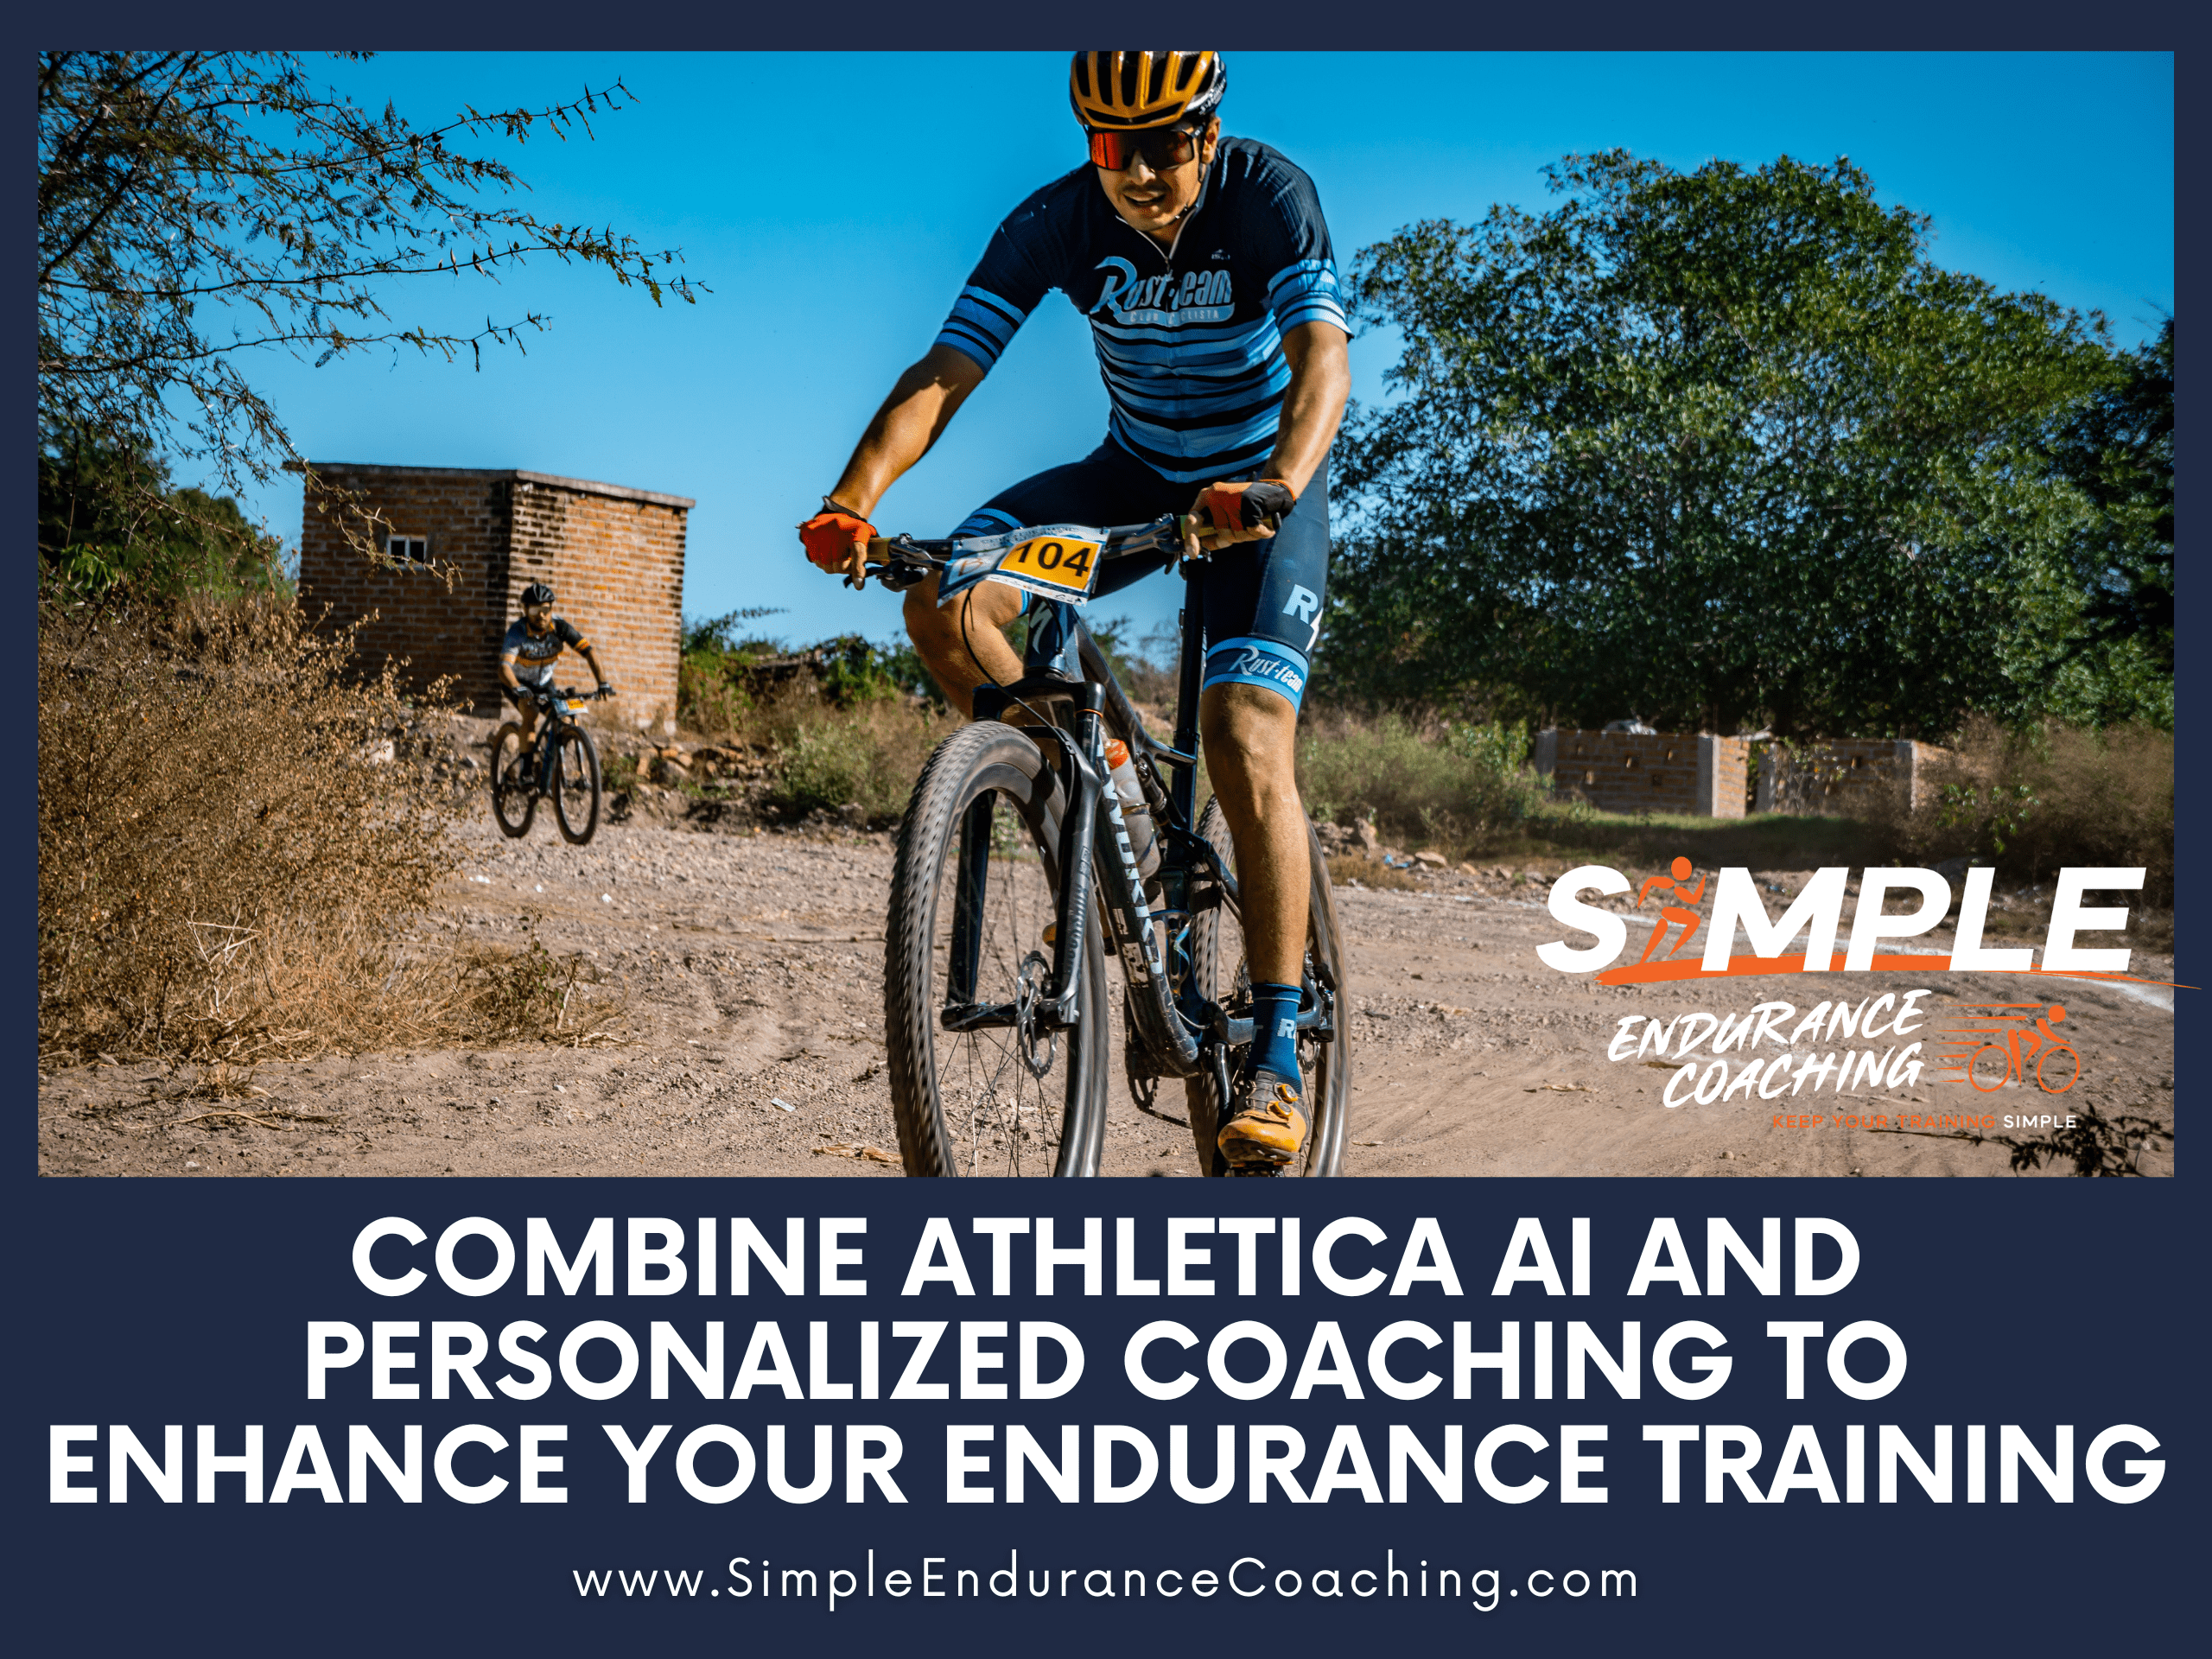 Athletica's AI training for cyclists revolutionizes endurance sports with flexible, science-based programs and human coaching integration, ideal for modern athletes and coaches.